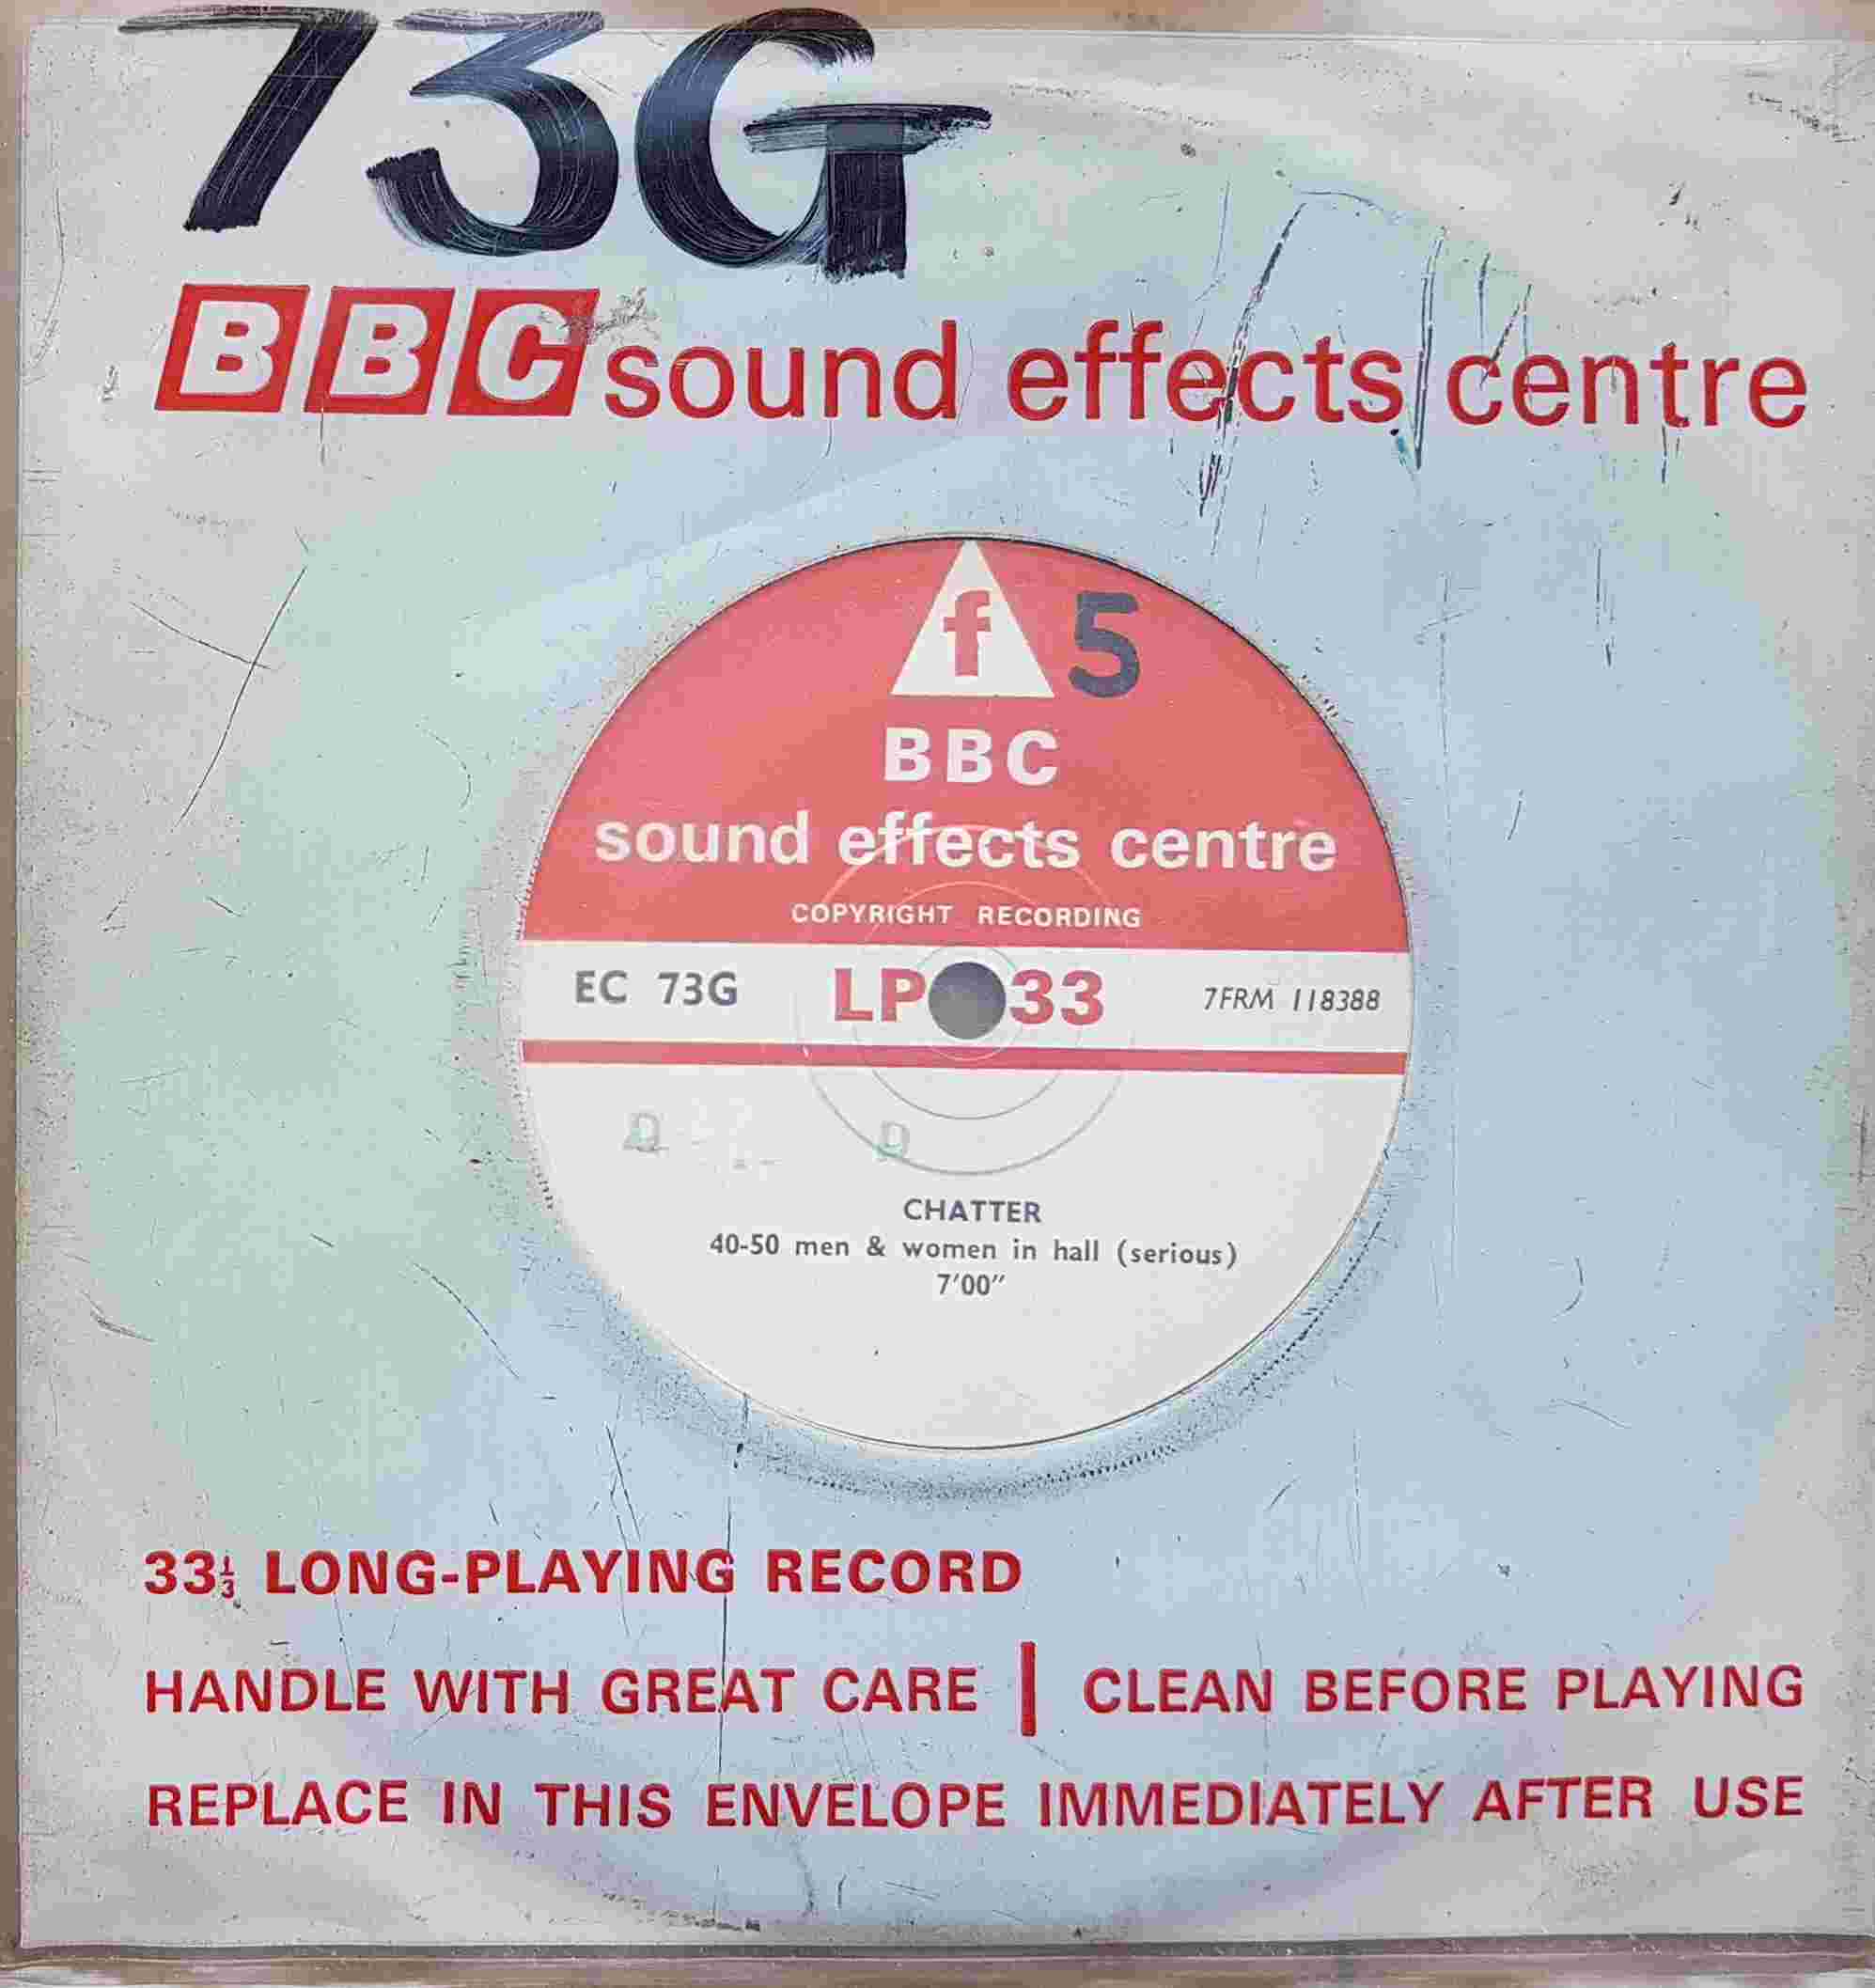 Picture of EC 73G Chatter by artist Not registered from the BBC records and Tapes library